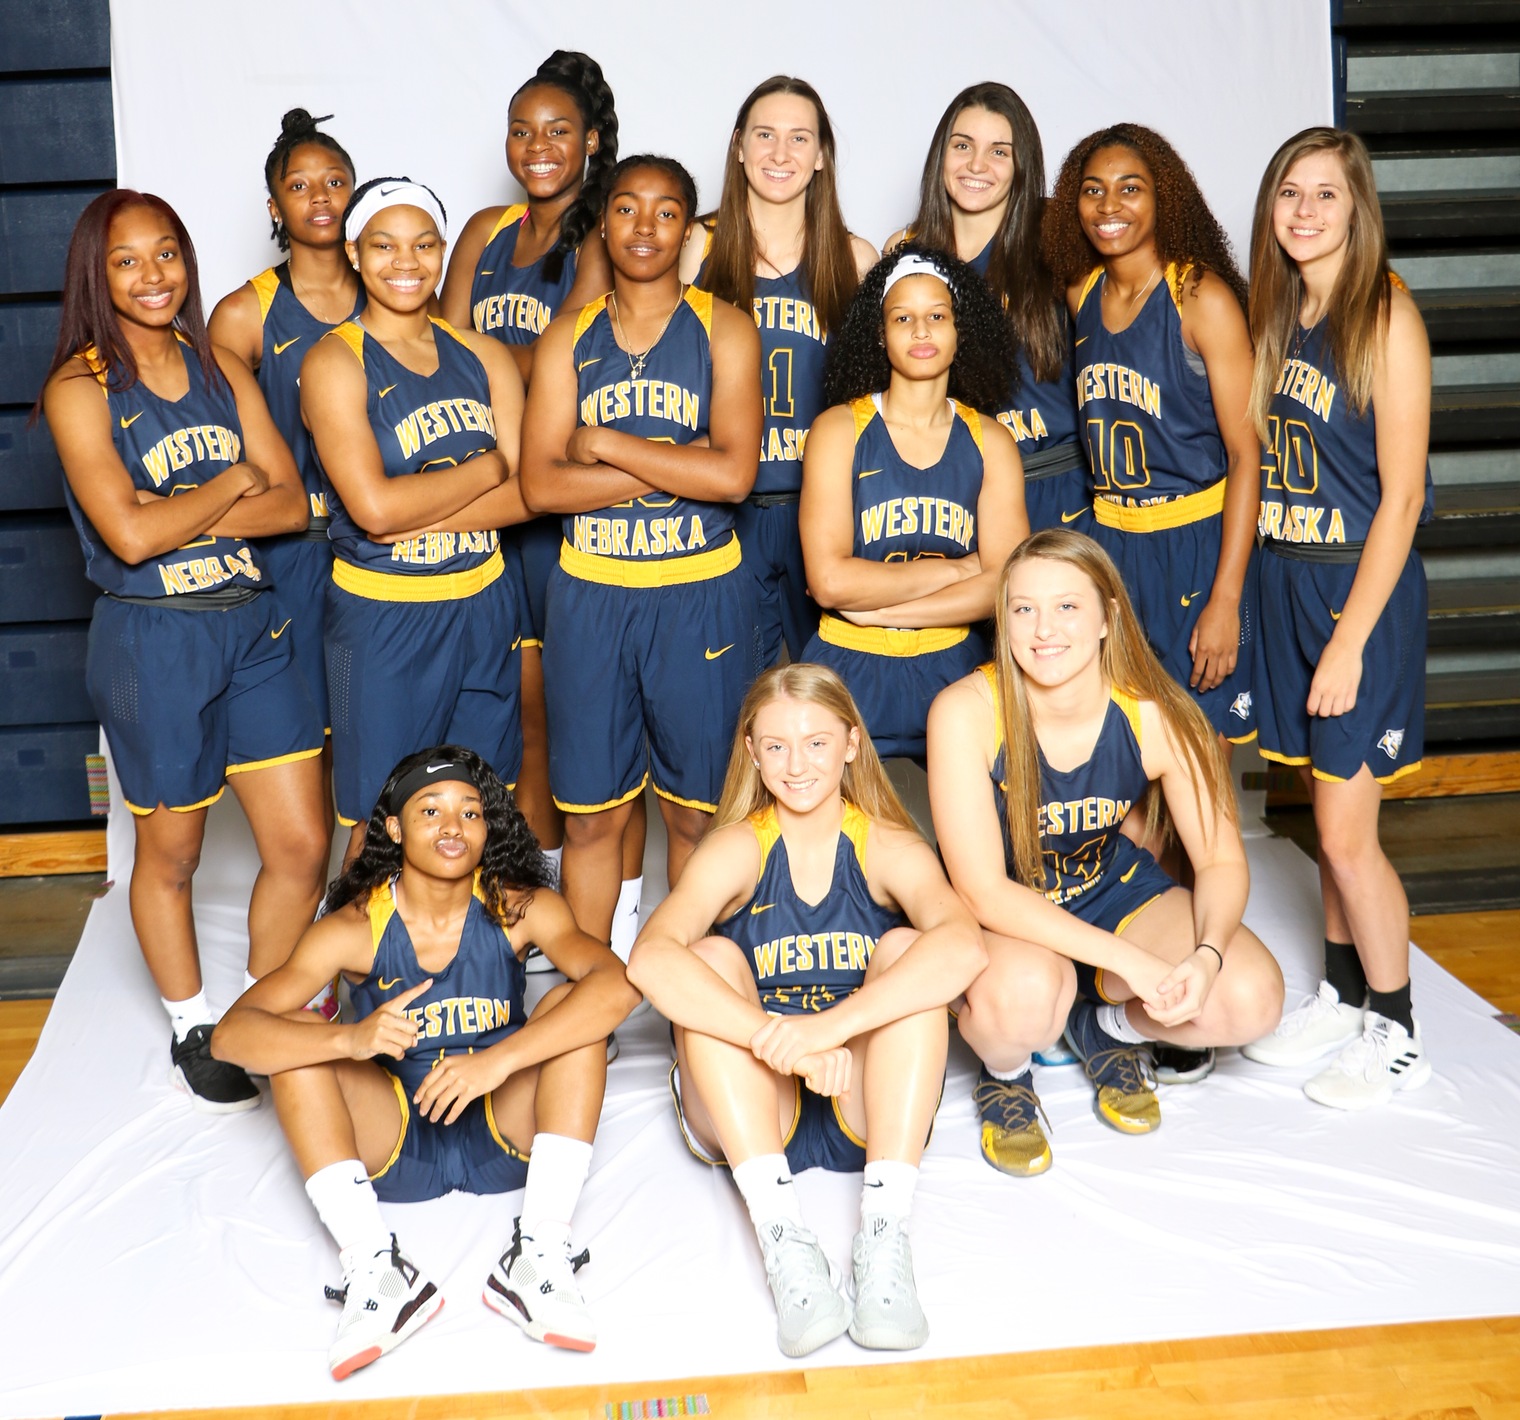 WNCC seeded 7th for national tourney, receive first-round bye